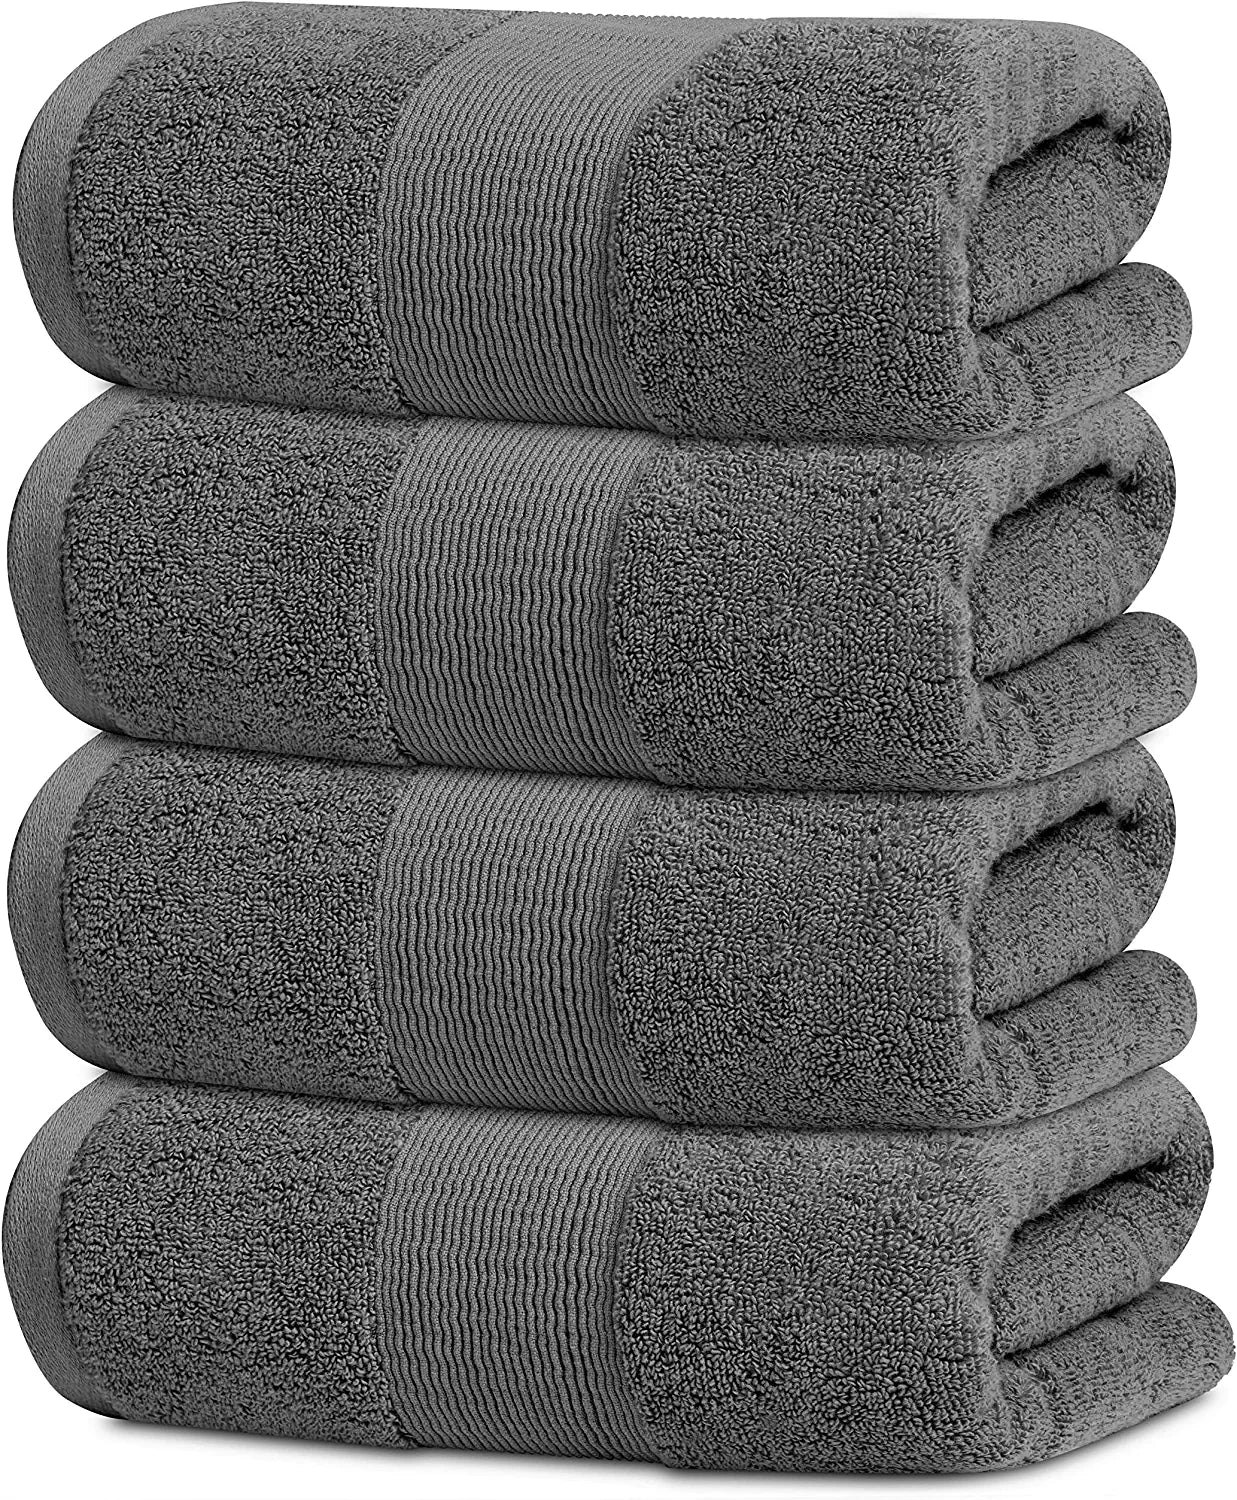 Resort Collection Gray Bath Towels